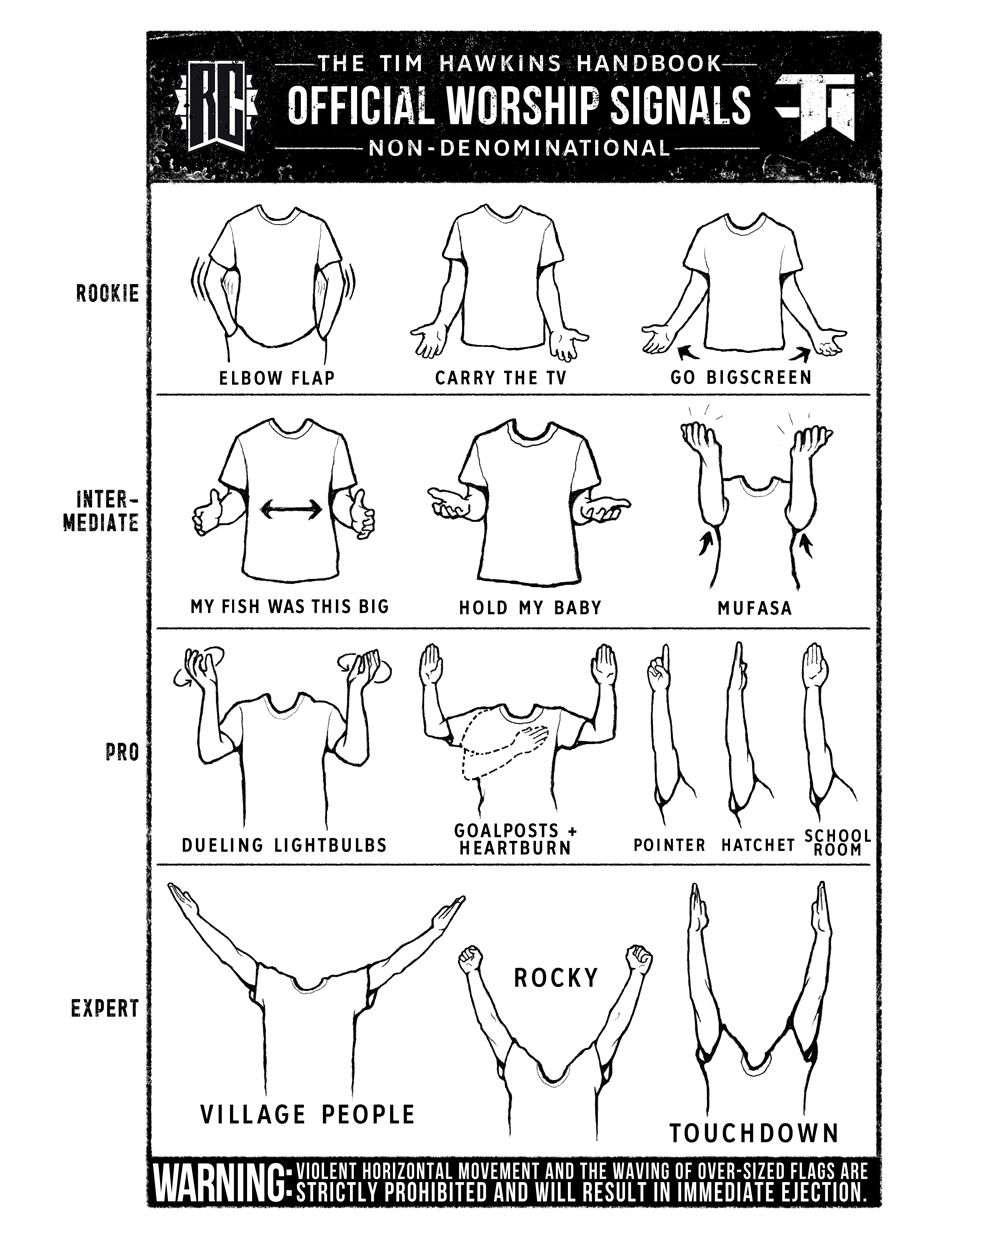 This One Incredible Chart Decodes Hand Gestures in Contemporary Worship